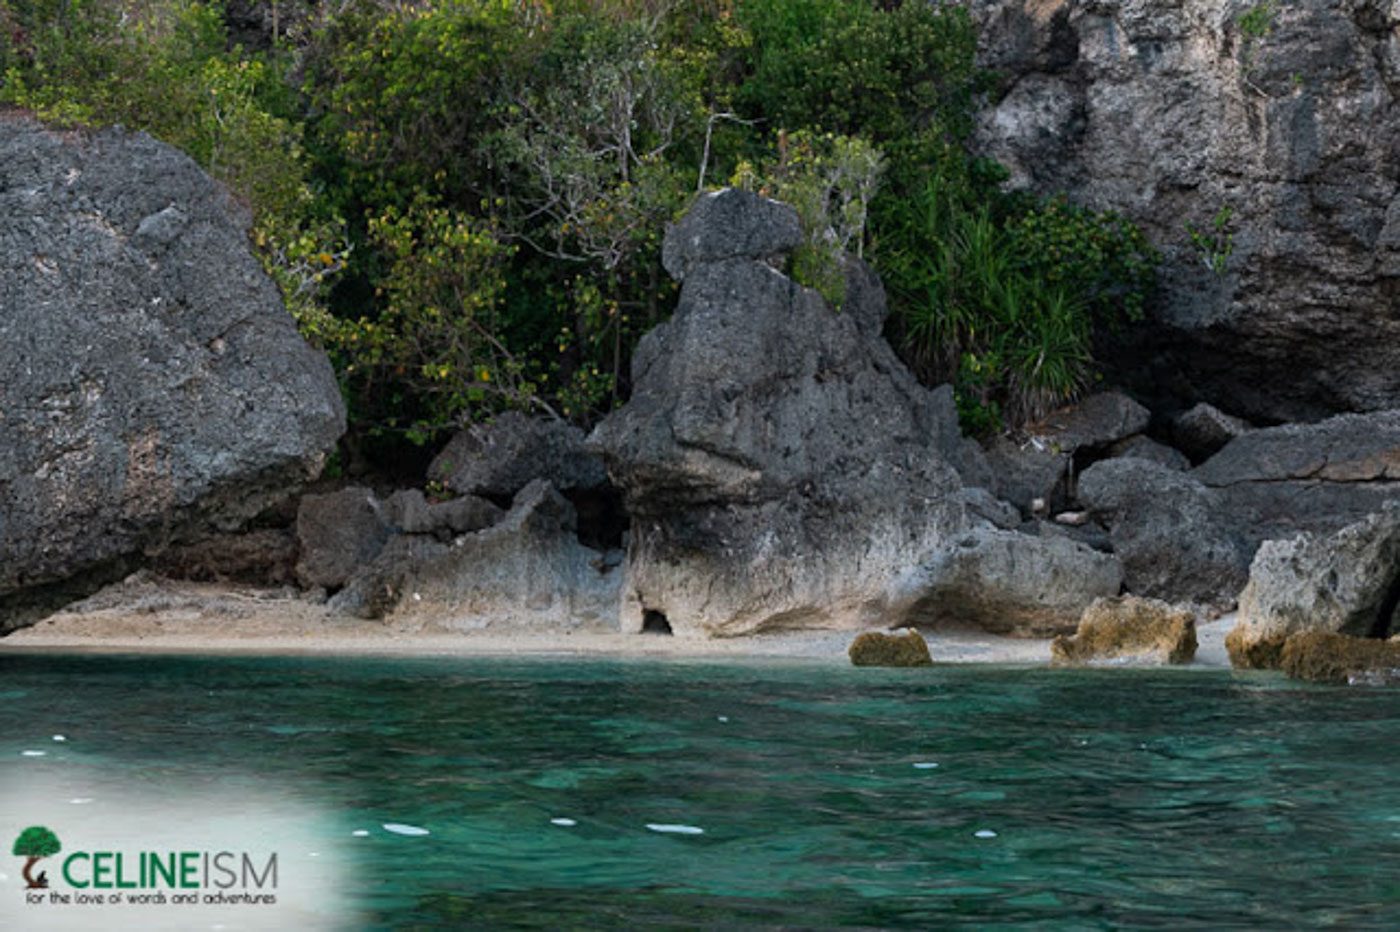 SECRET COVE. Marinduque’s Gaspar Island has a cove with white sand and curving rocks. Photo by Celine Murillo

 